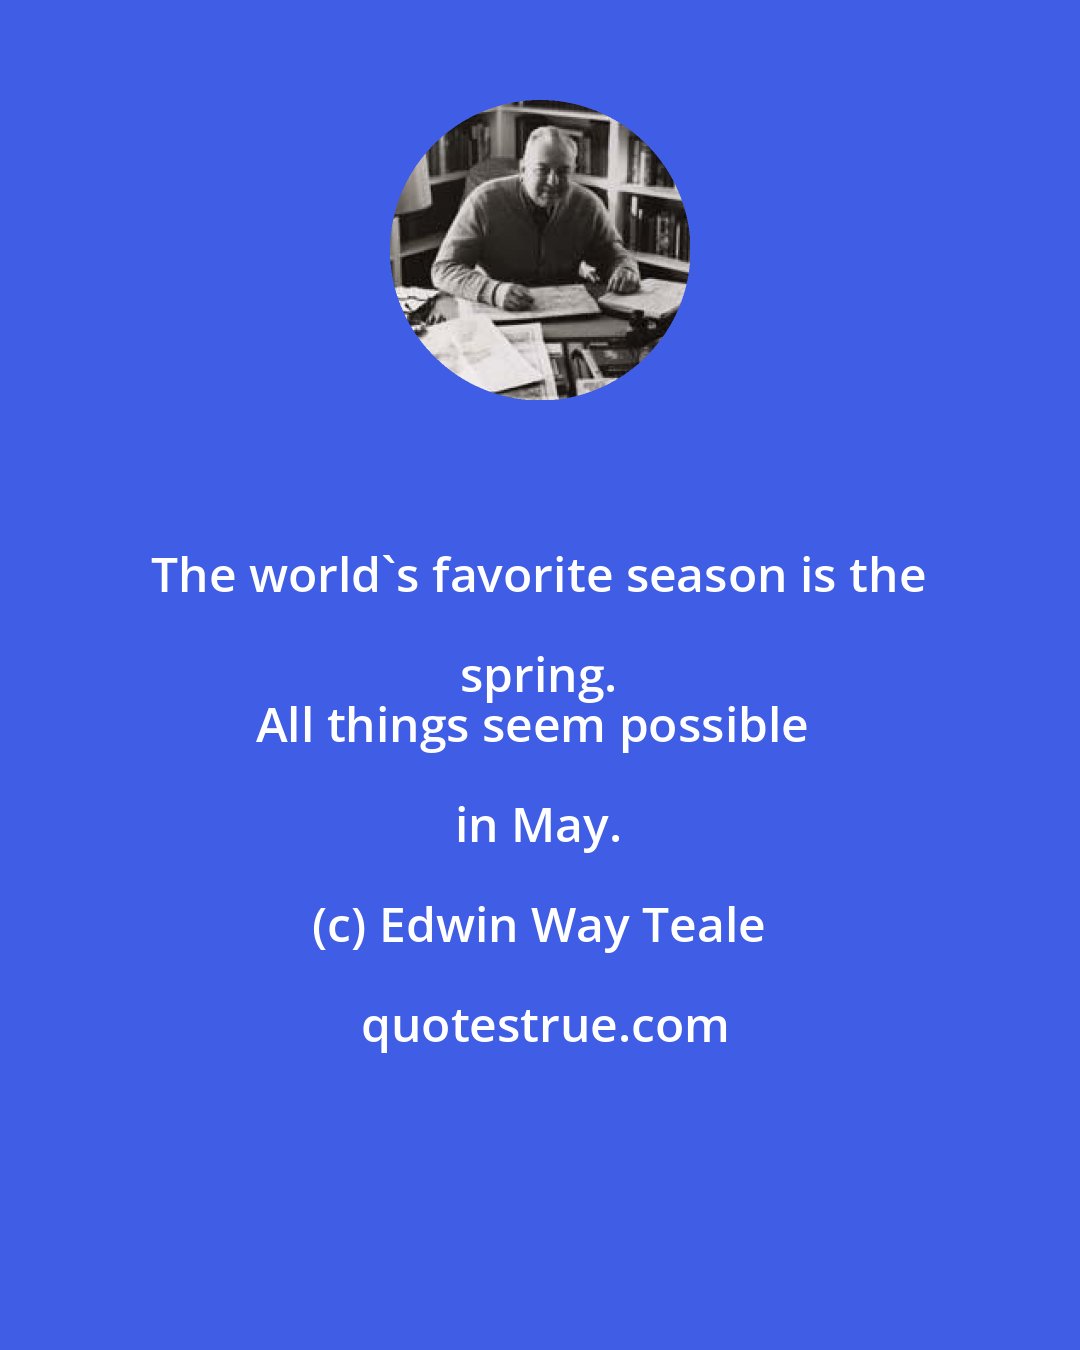 Edwin Way Teale: The world's favorite season is the spring. 
All things seem possible in May.